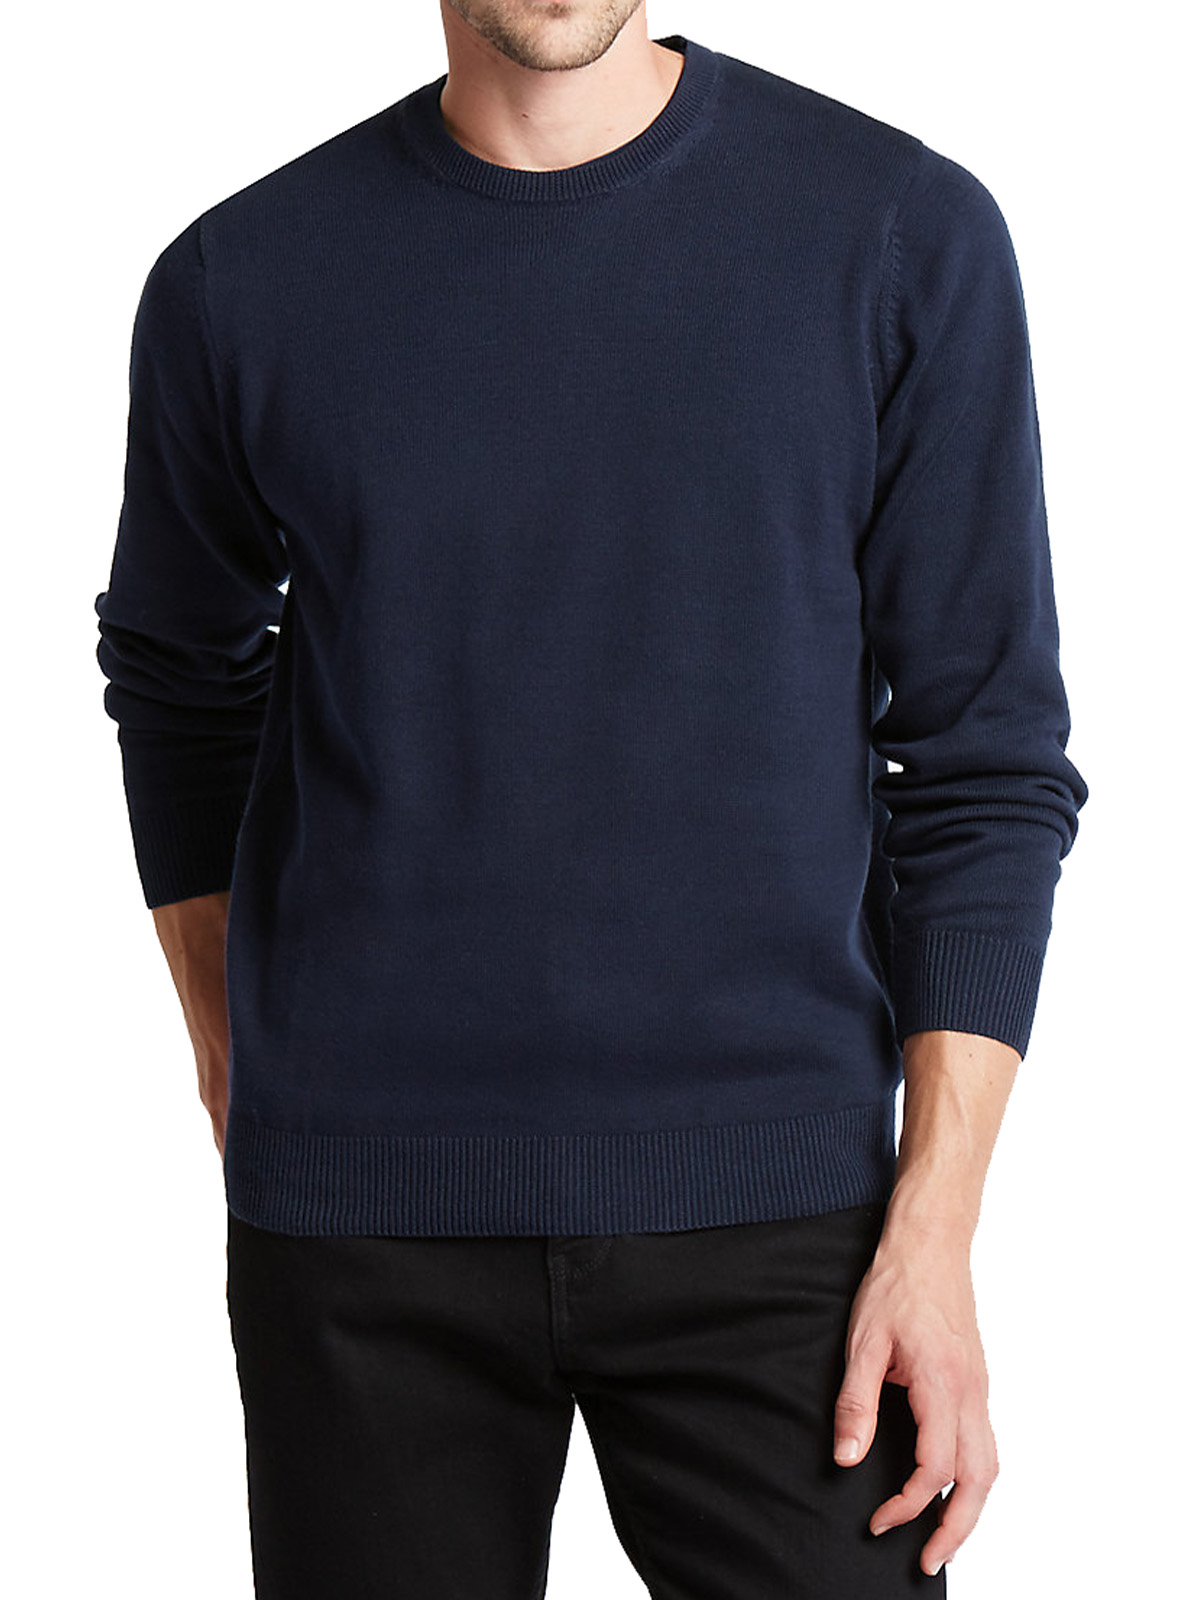 Marks and Spencer - - M&5 INDIGO Pure Cotton Crew Neck Jumper - Size ...